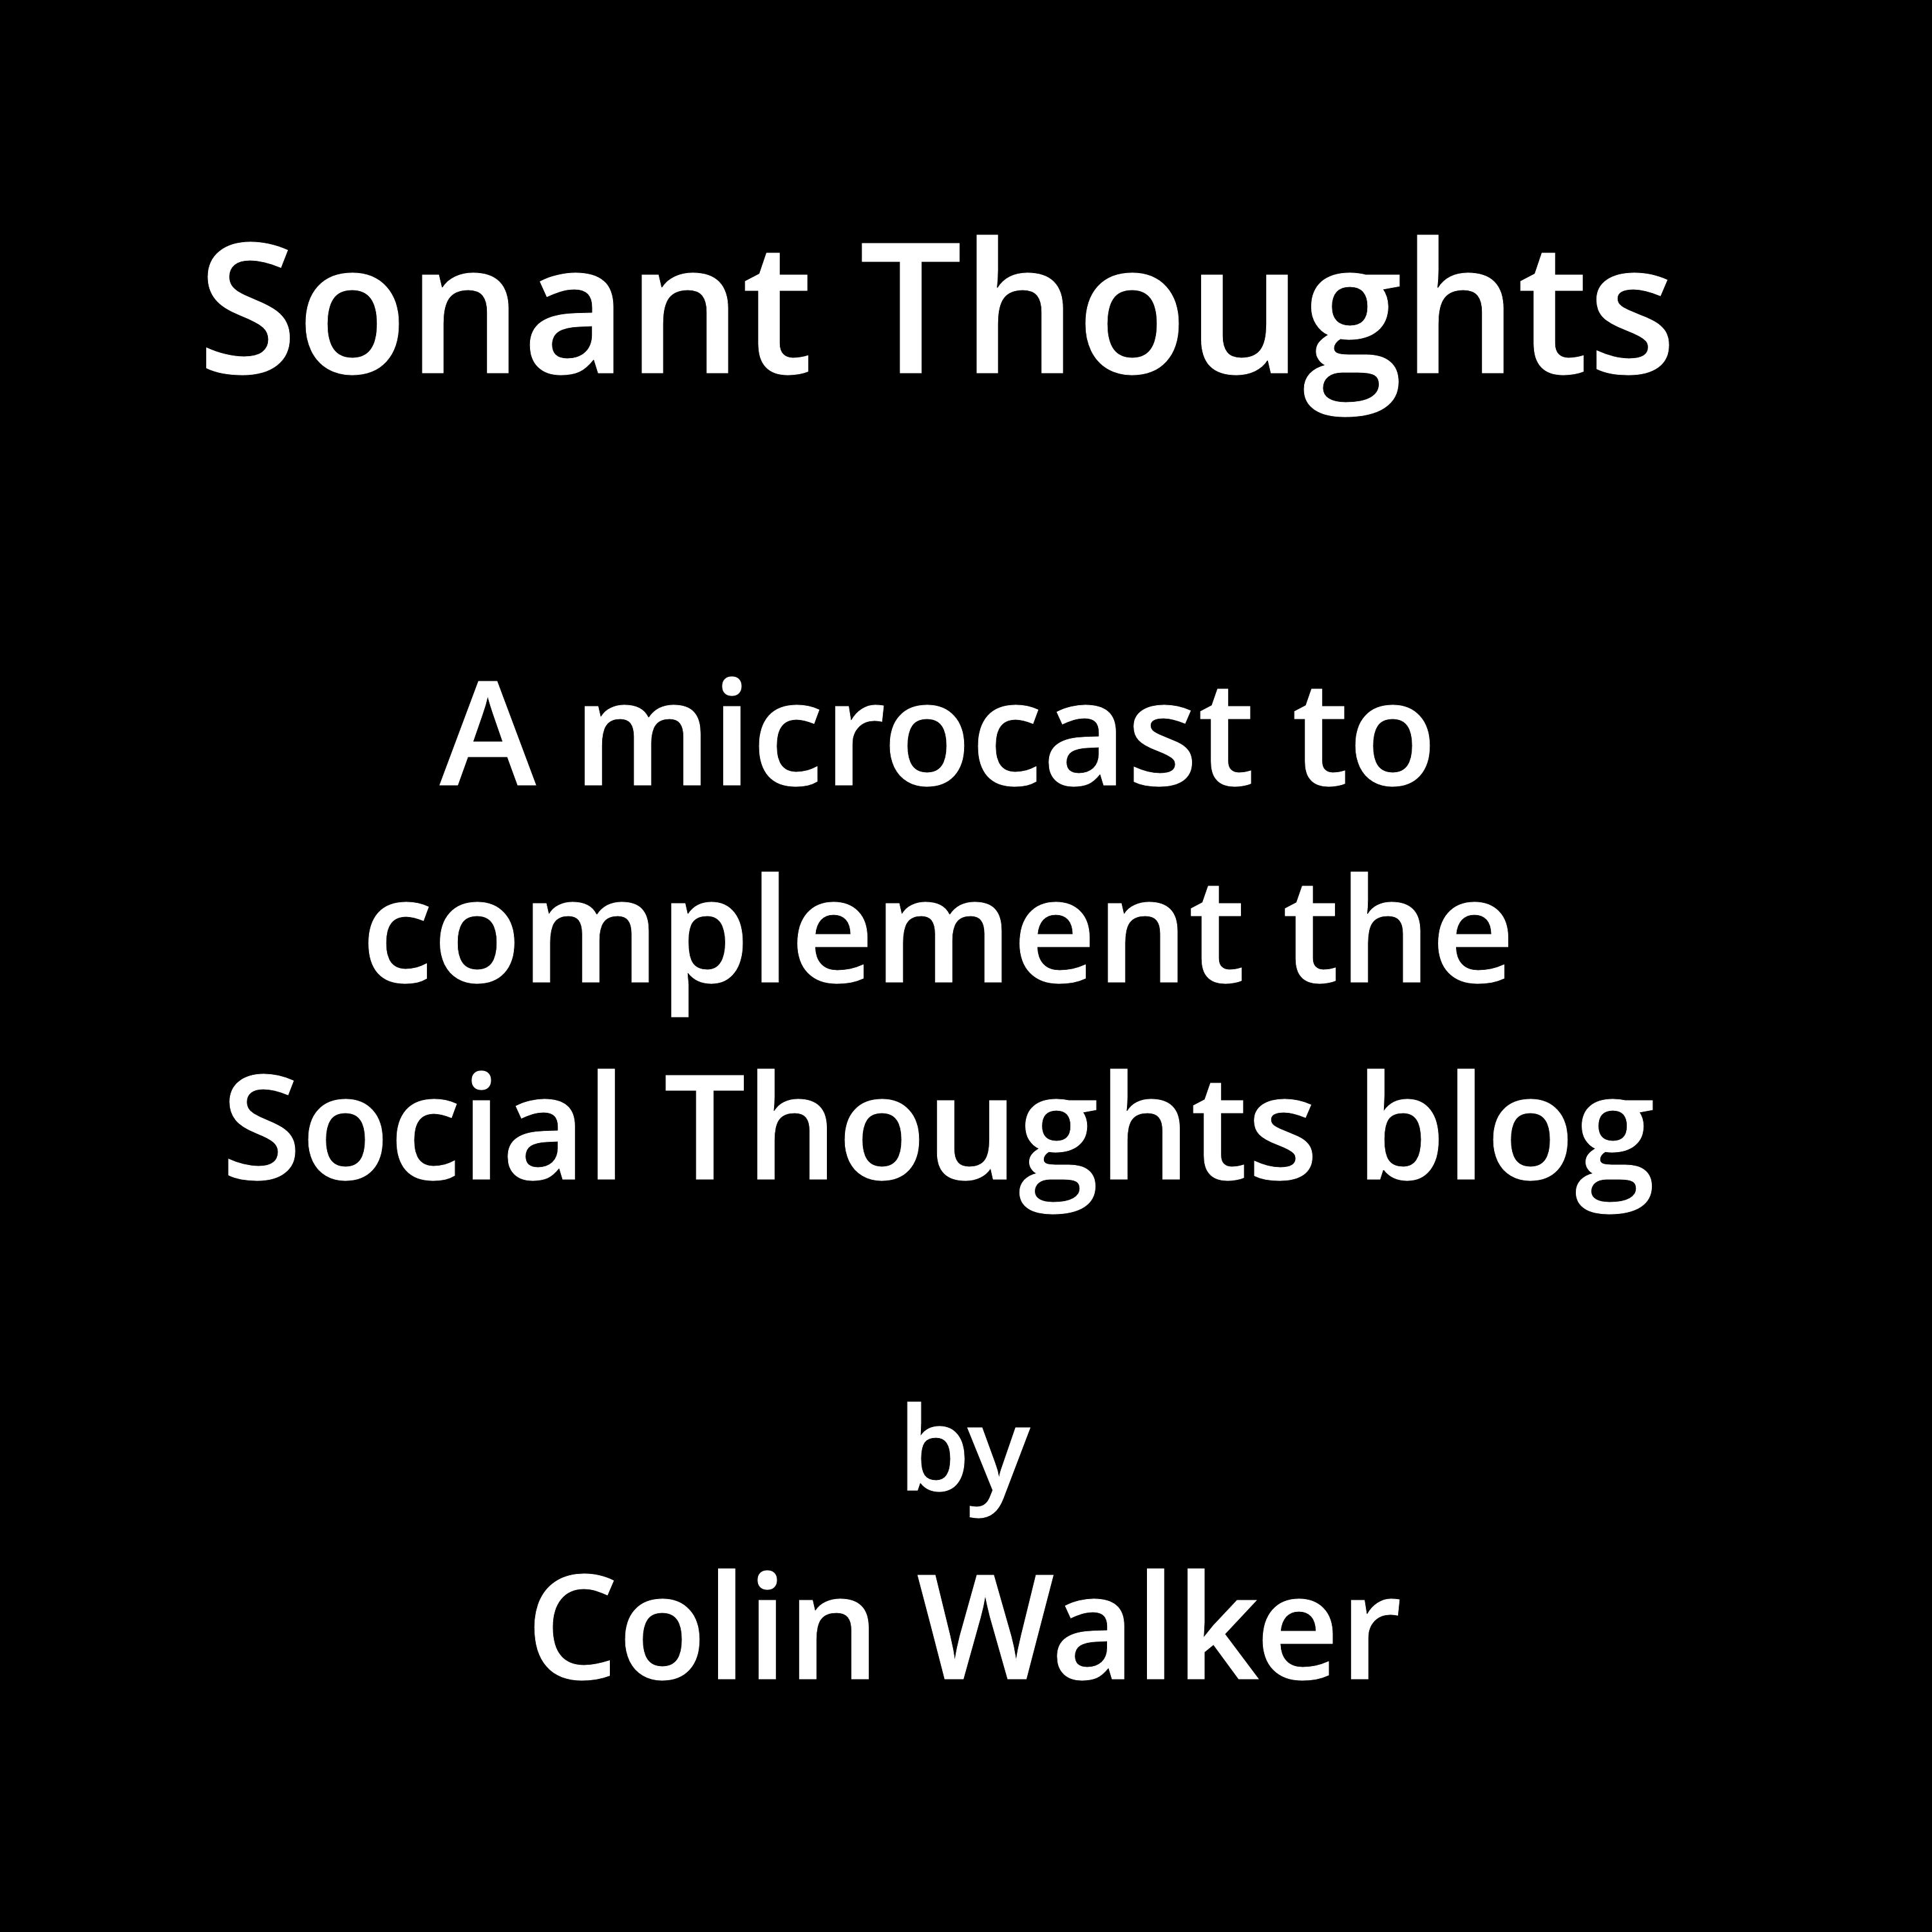 Sonant Thoughts